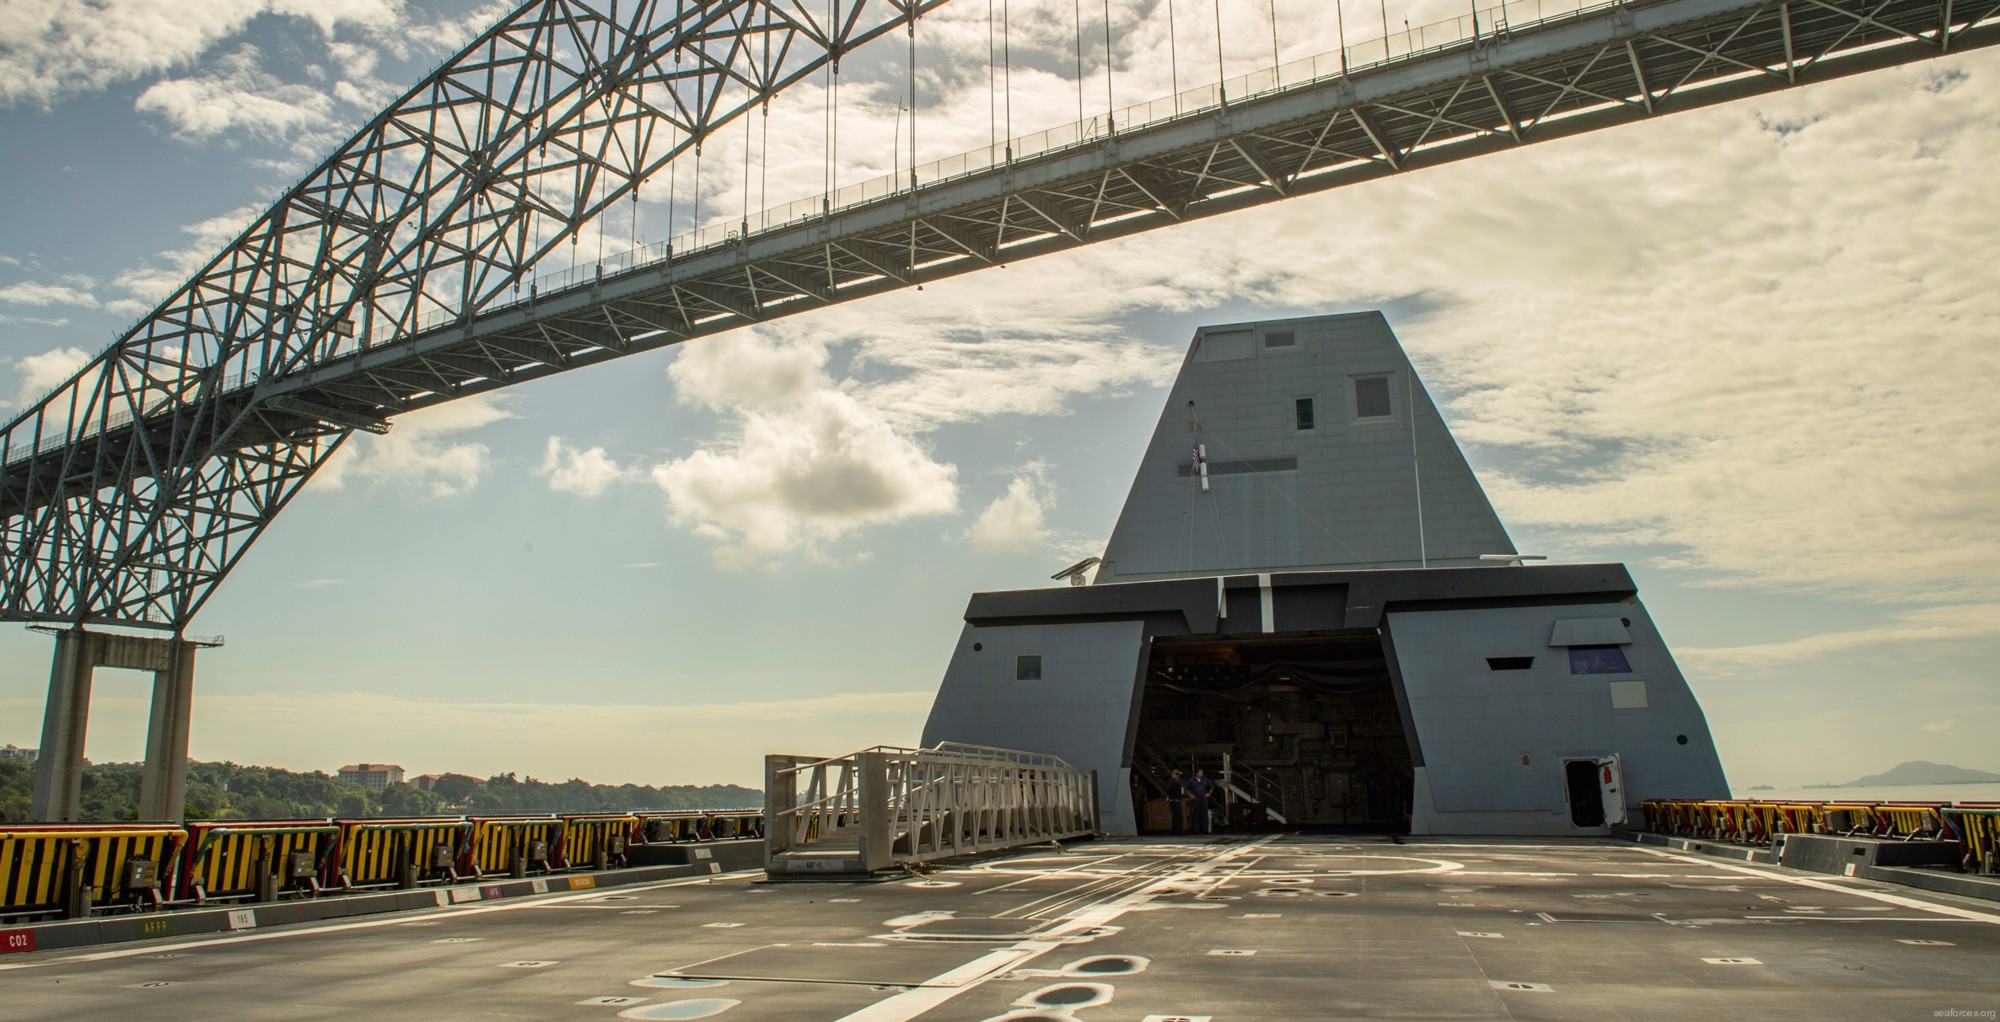 ddg-1001 uss michael monsoor zumwalt class guided missile destroyer us navy panama canal 23